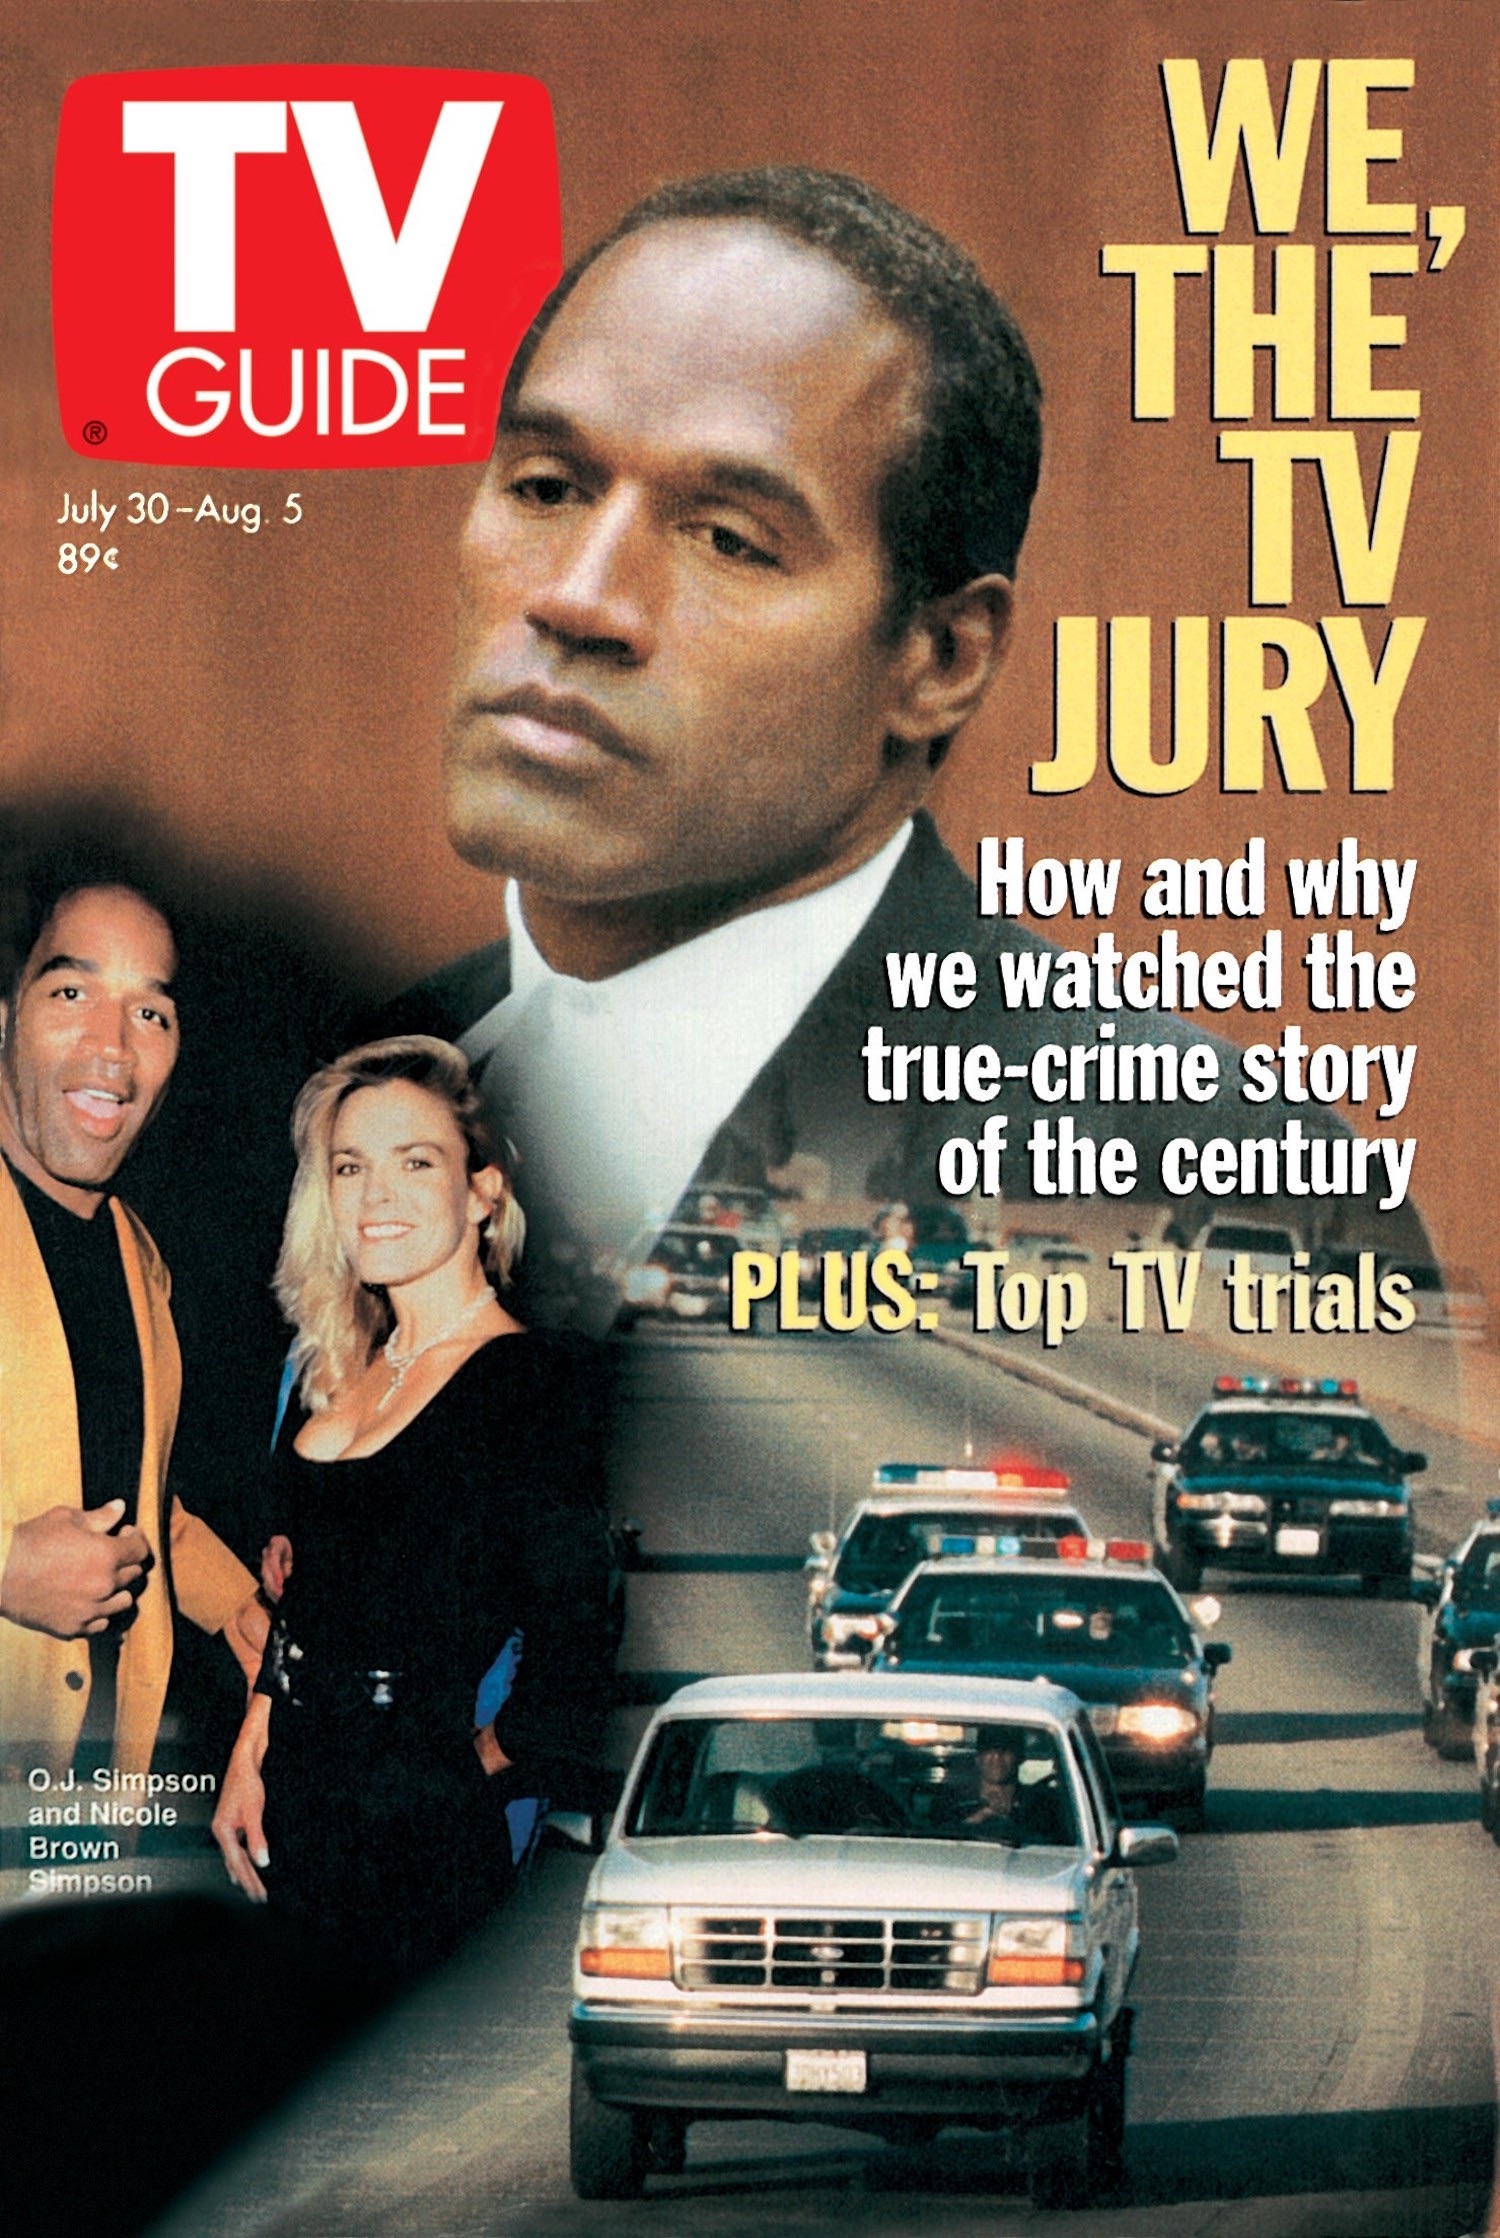 O.J. Simpson trial and car chase TV Guide Magazine cover